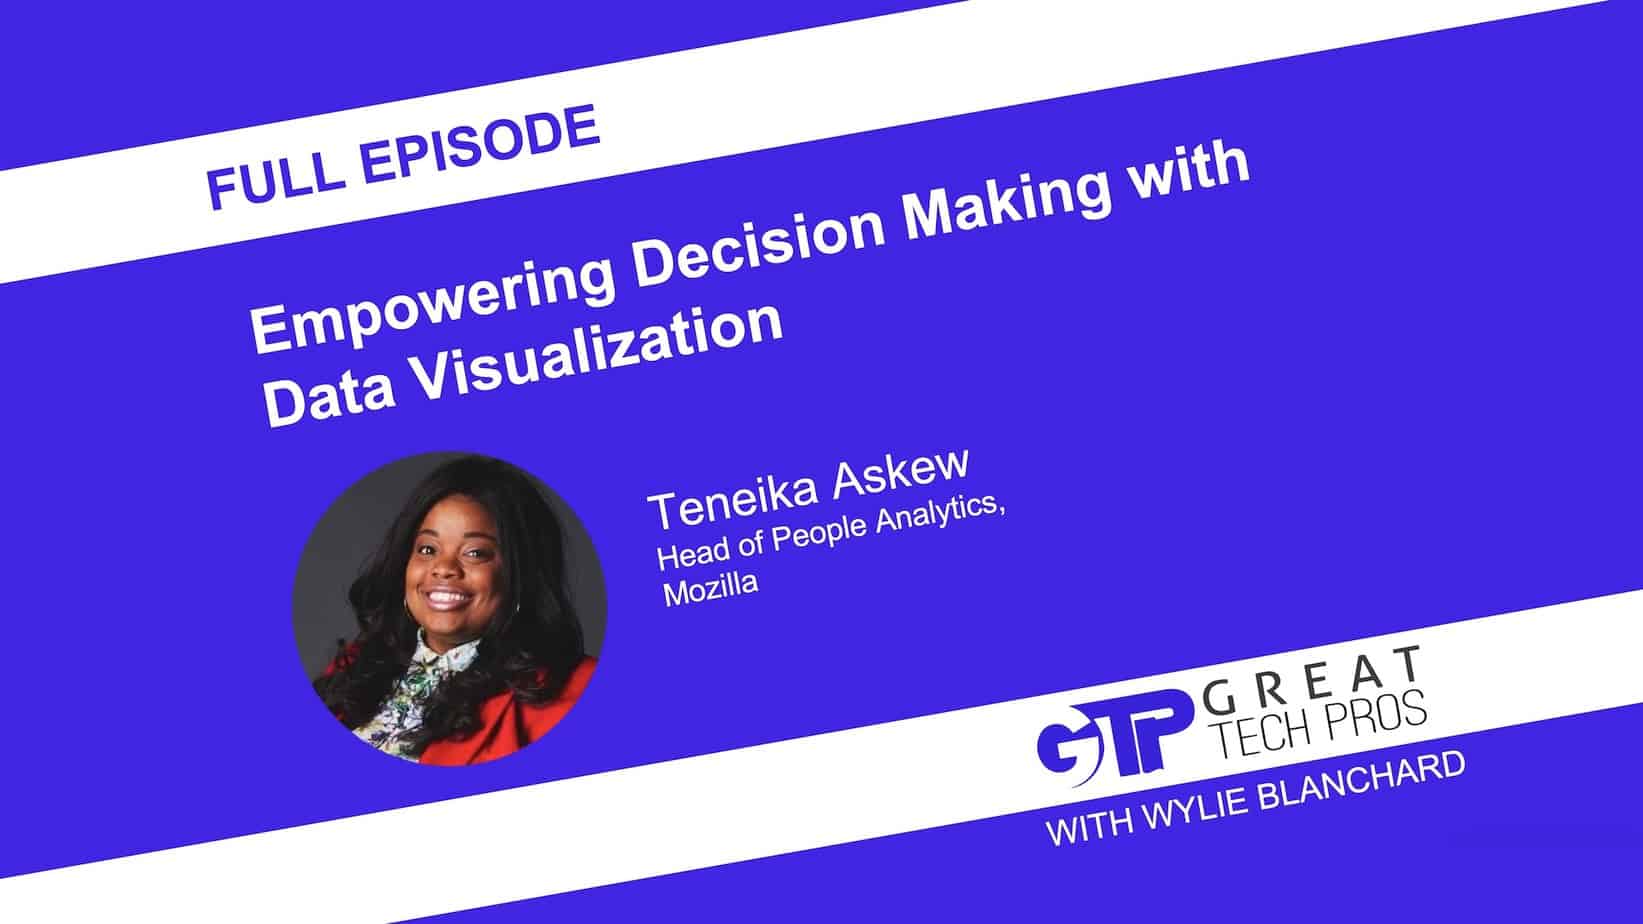 Discussion with Teneika Askew: Empowering Decision Making with Data Visualization